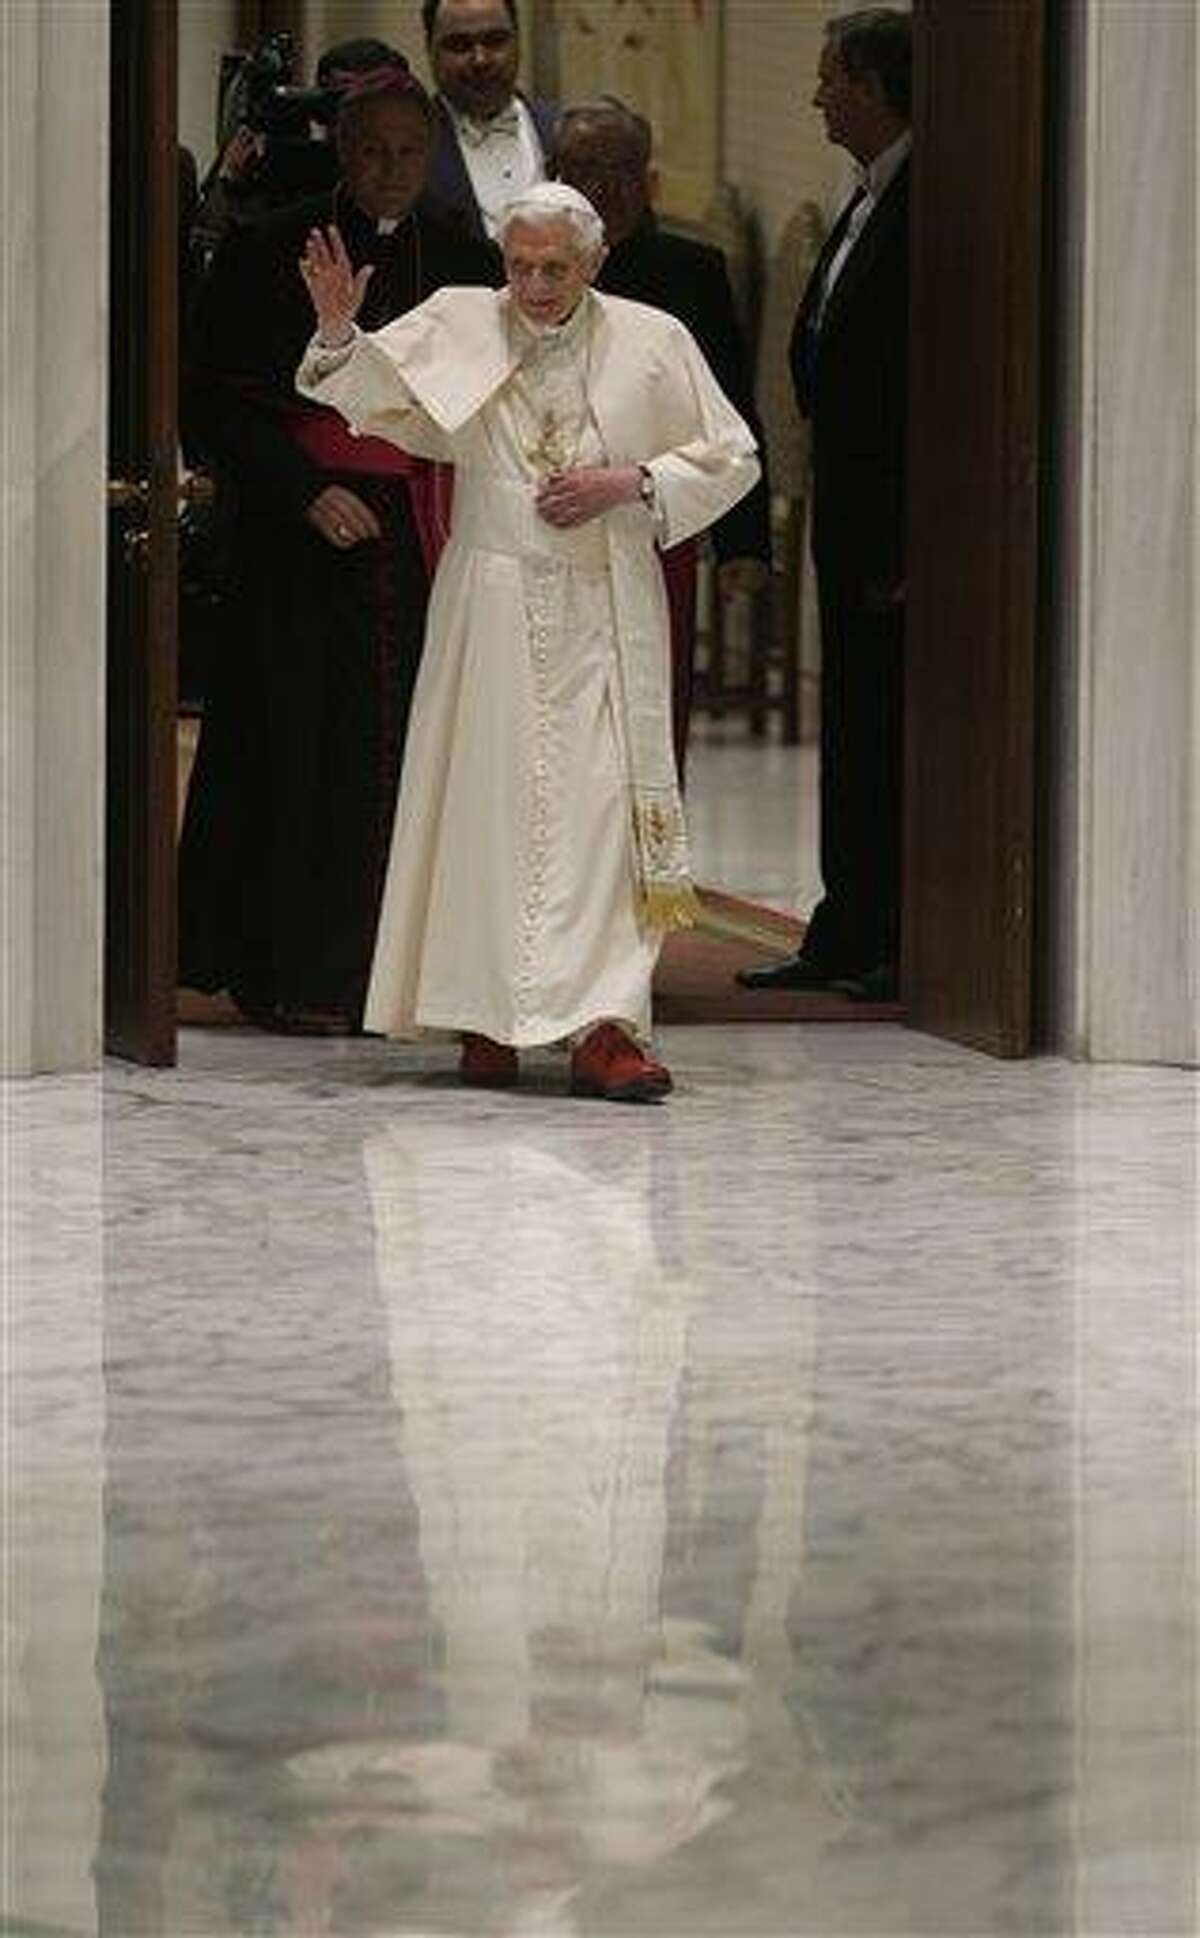 Pope Benedict XVI arrives for his weekly general audience at the Paul VI Hall at the Vatican, Wednesday Feb. 13, 2013. Thousands of people flooded the Vatican's main audience hall Wednesday for Pope Benedict XVI's first public appearance since his bombshell resignation announcement, taking advantage of his second-to-last public audience before retiring at the end of the month. AP Photo/Alessandra Tarantino